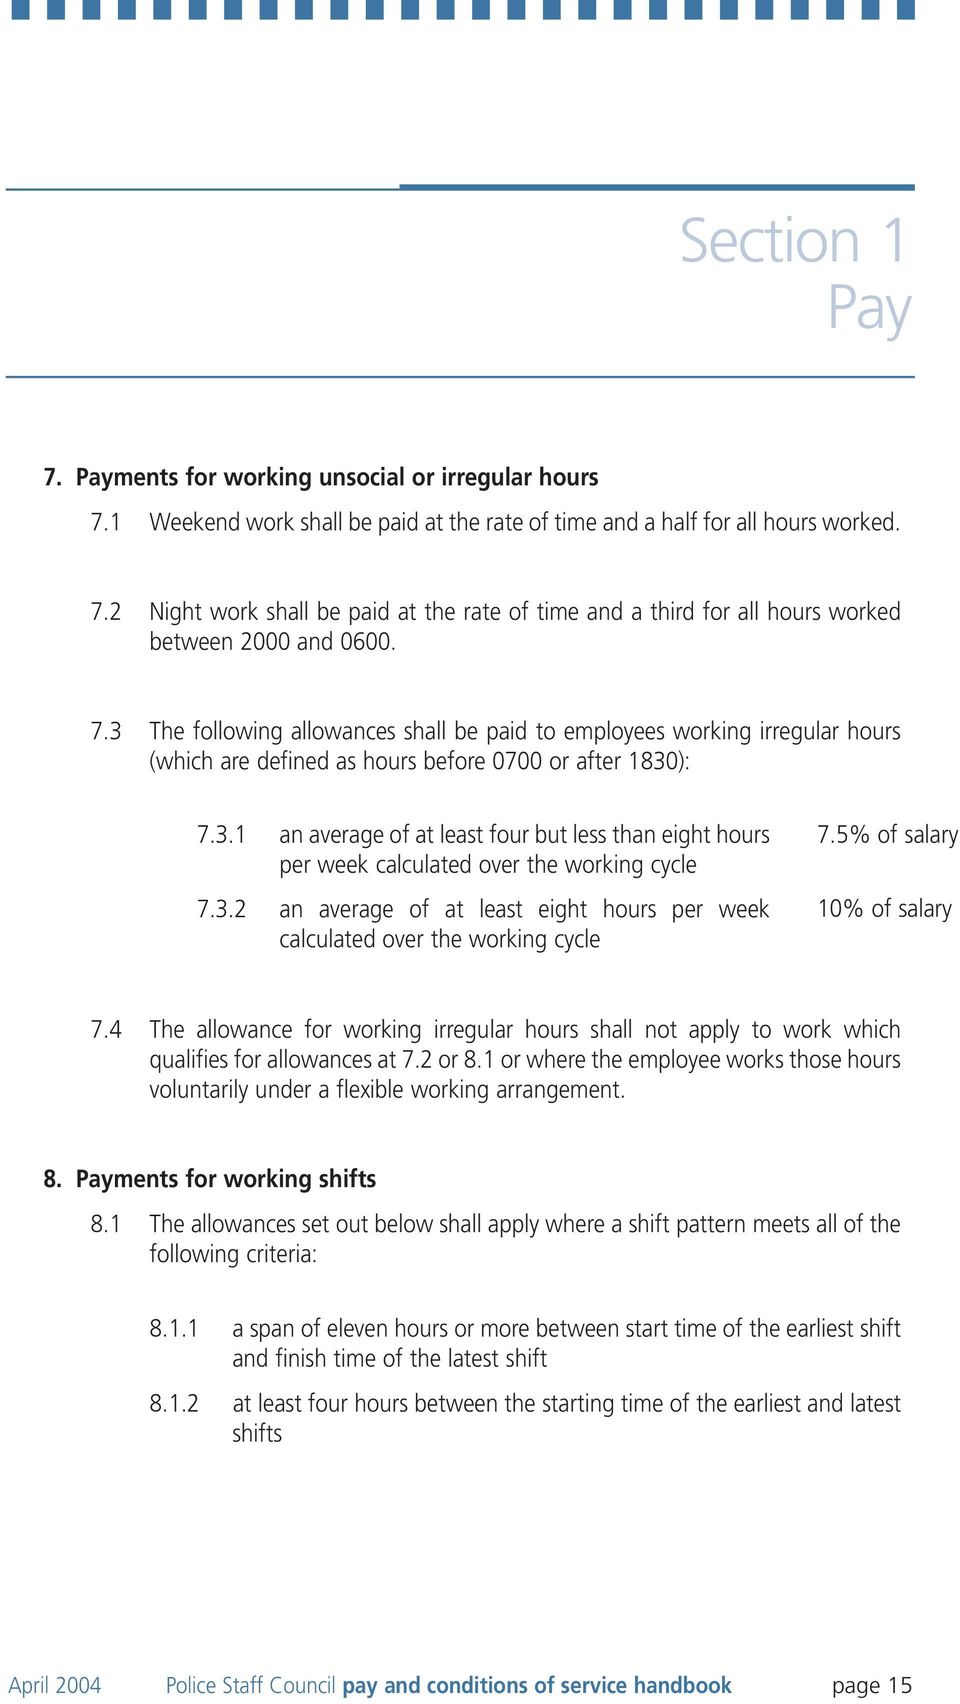 3.2 an average of at least eight hours per week calculated over the working cycle 7.5% of salary 10% of salary 7.